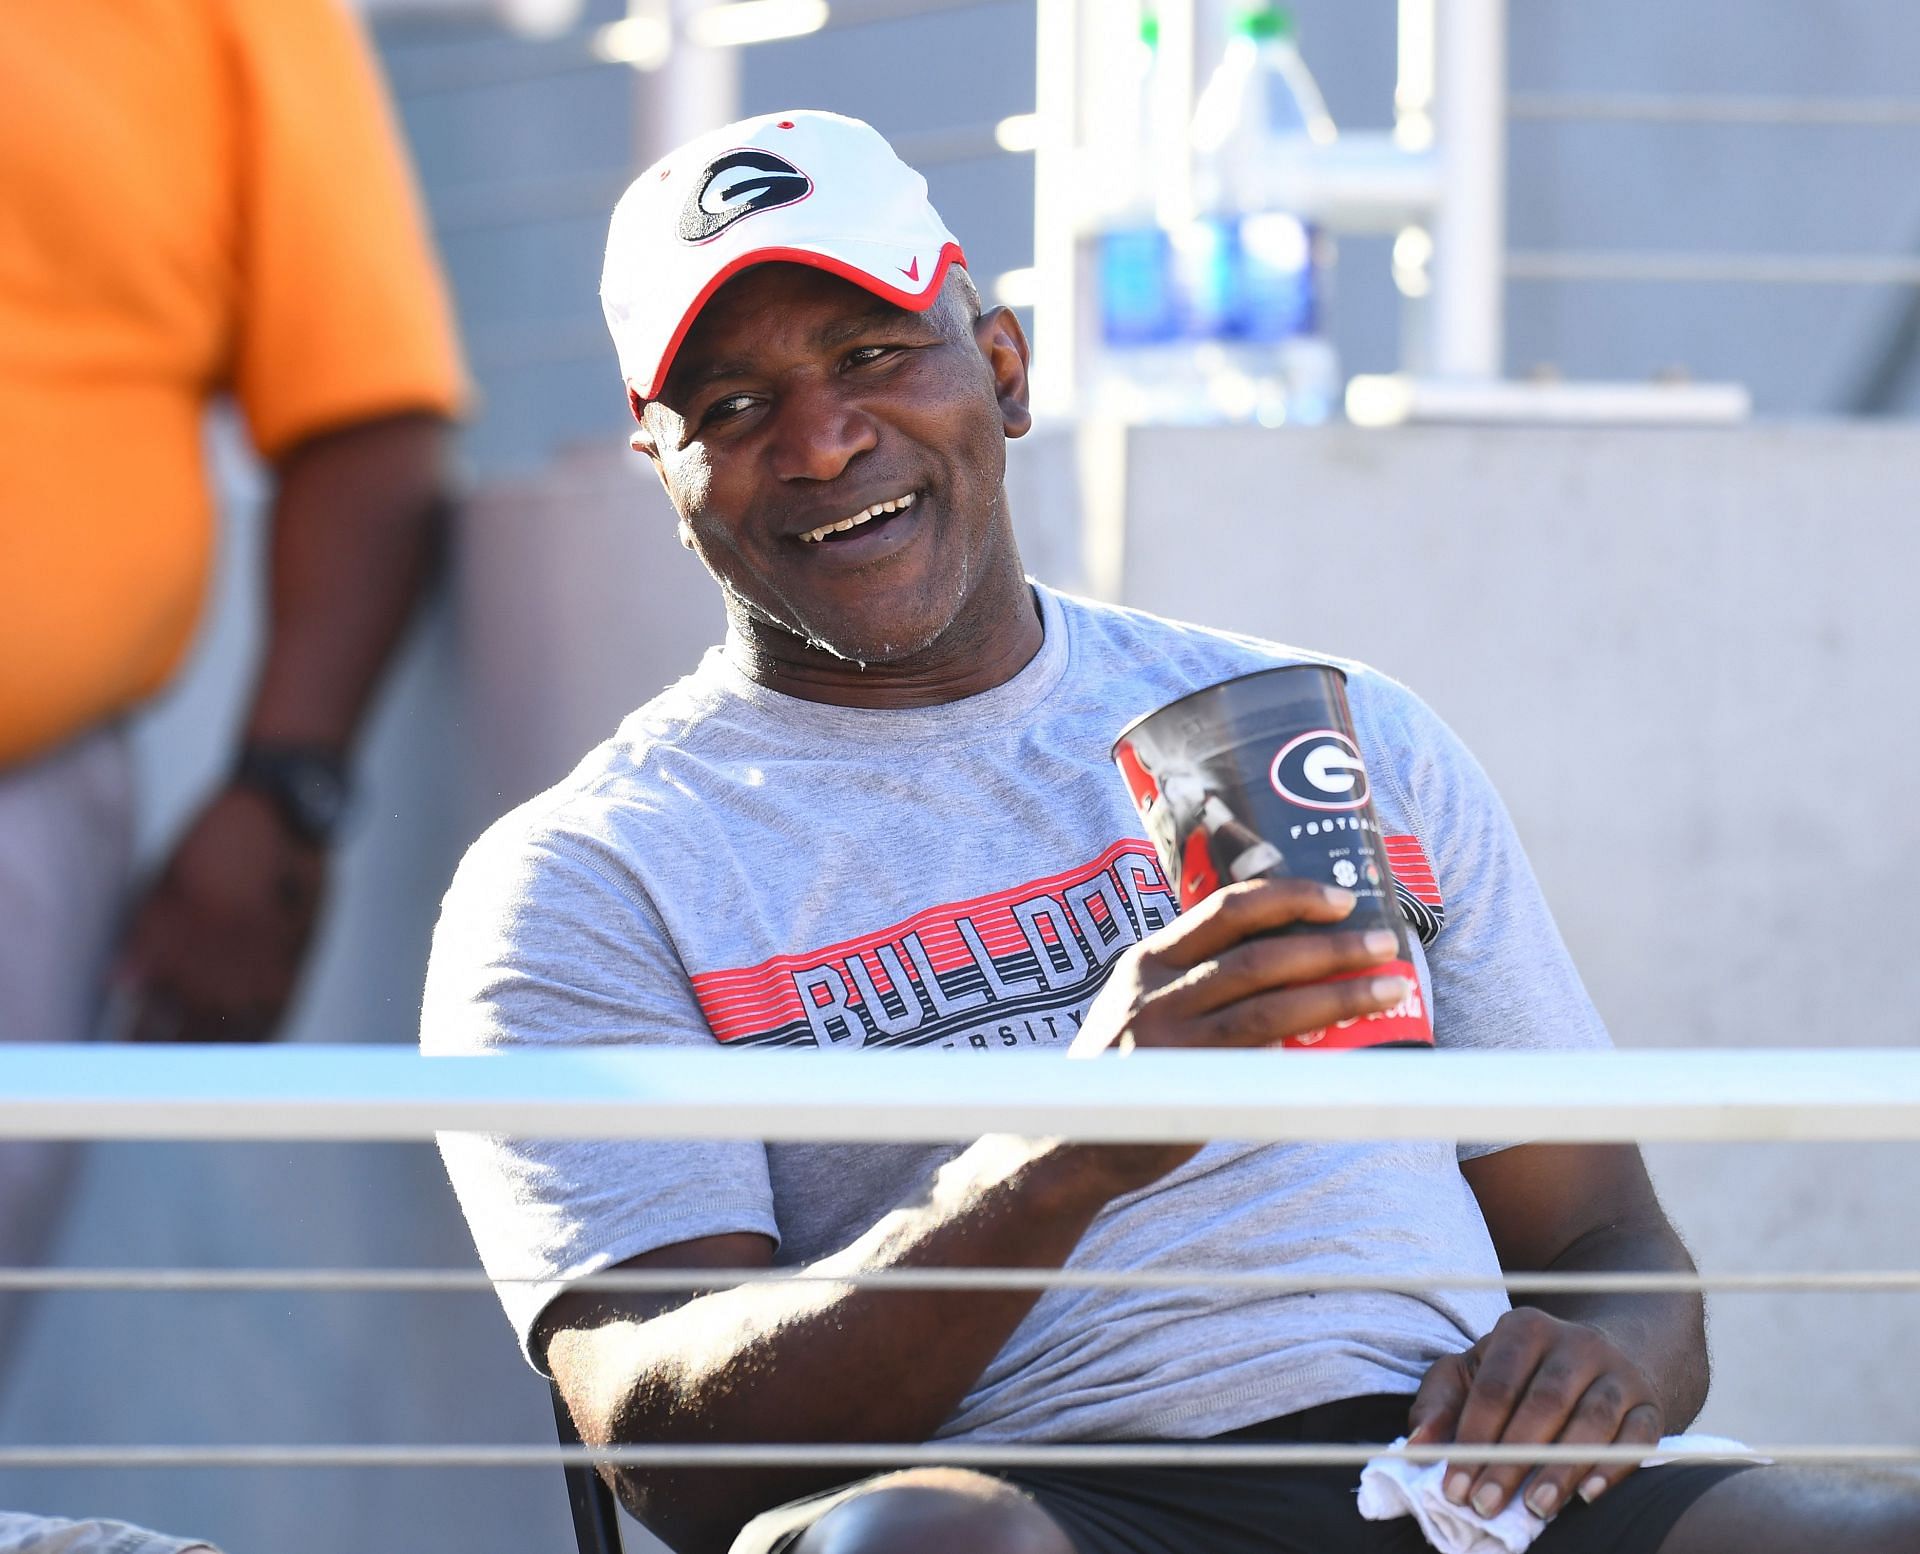 Boxing legend Evander Holyfield watches his son Elijah of the Georgia Bulldogs play against the Austin Peay Governors